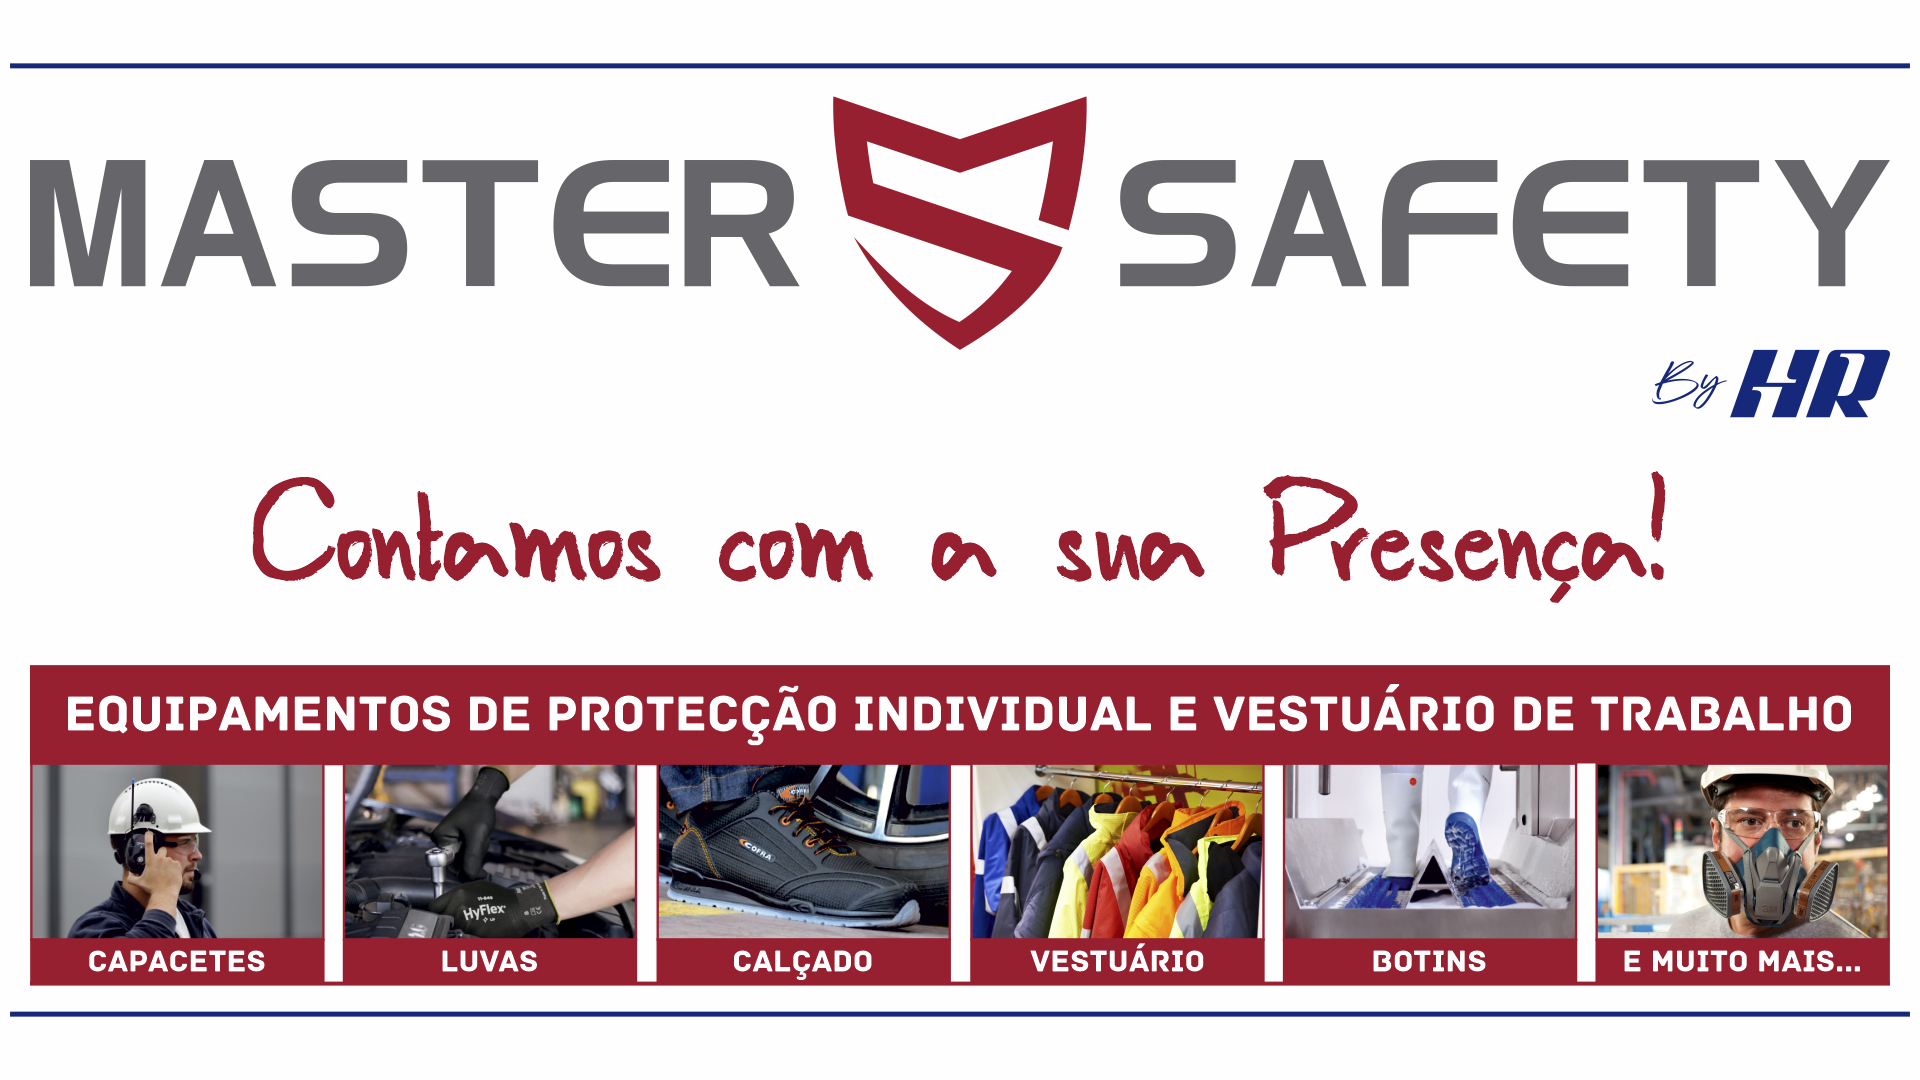 Master Safety by HR Group